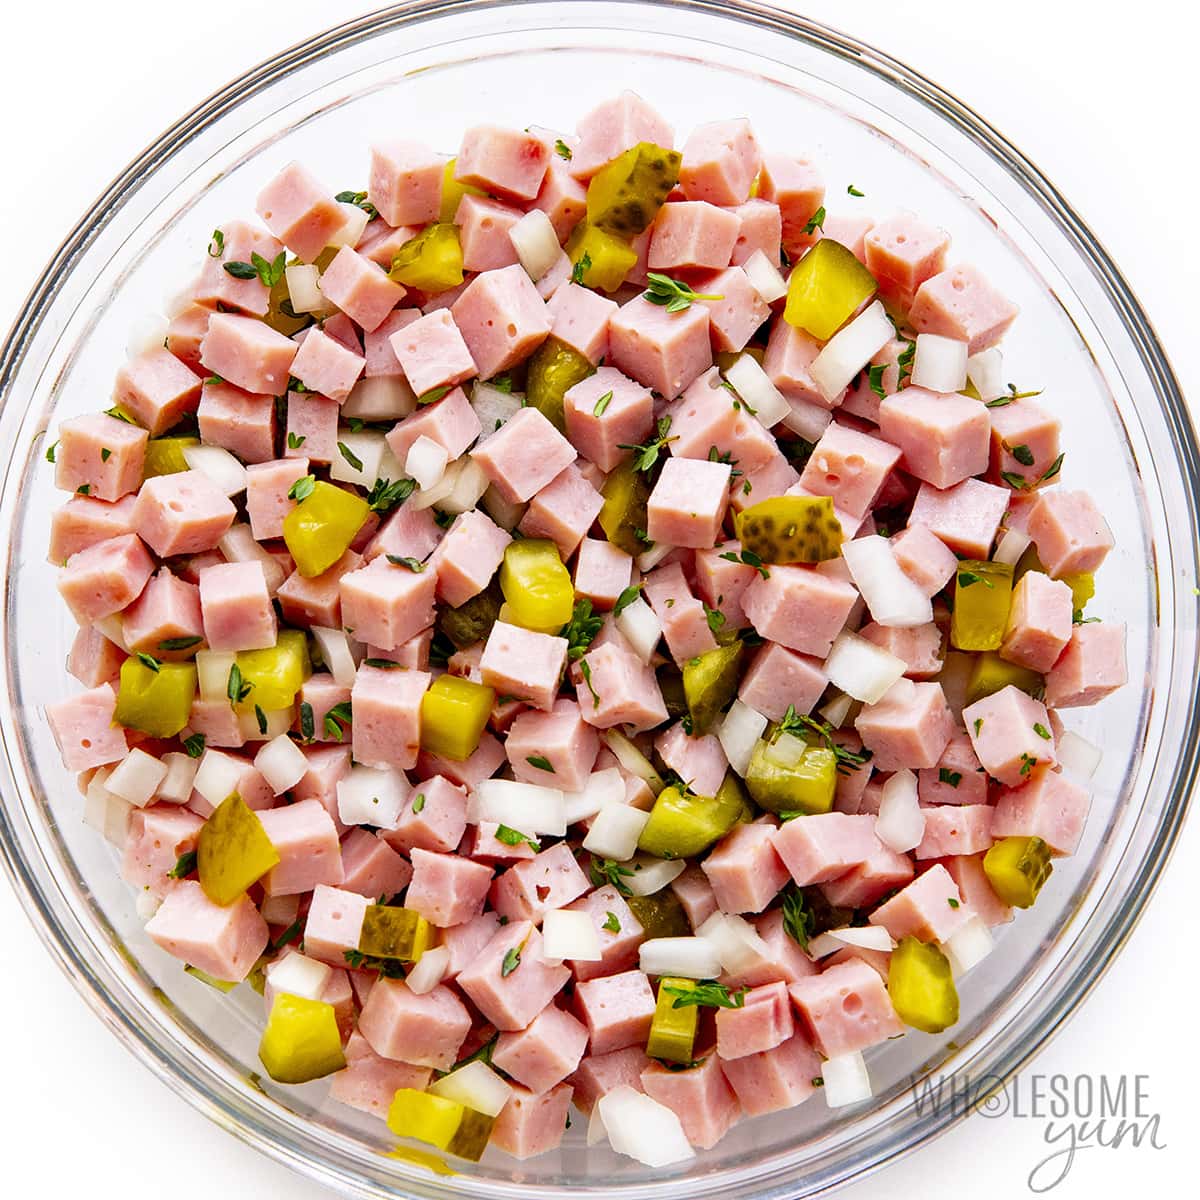 Ham and other ingredients in a bowl.